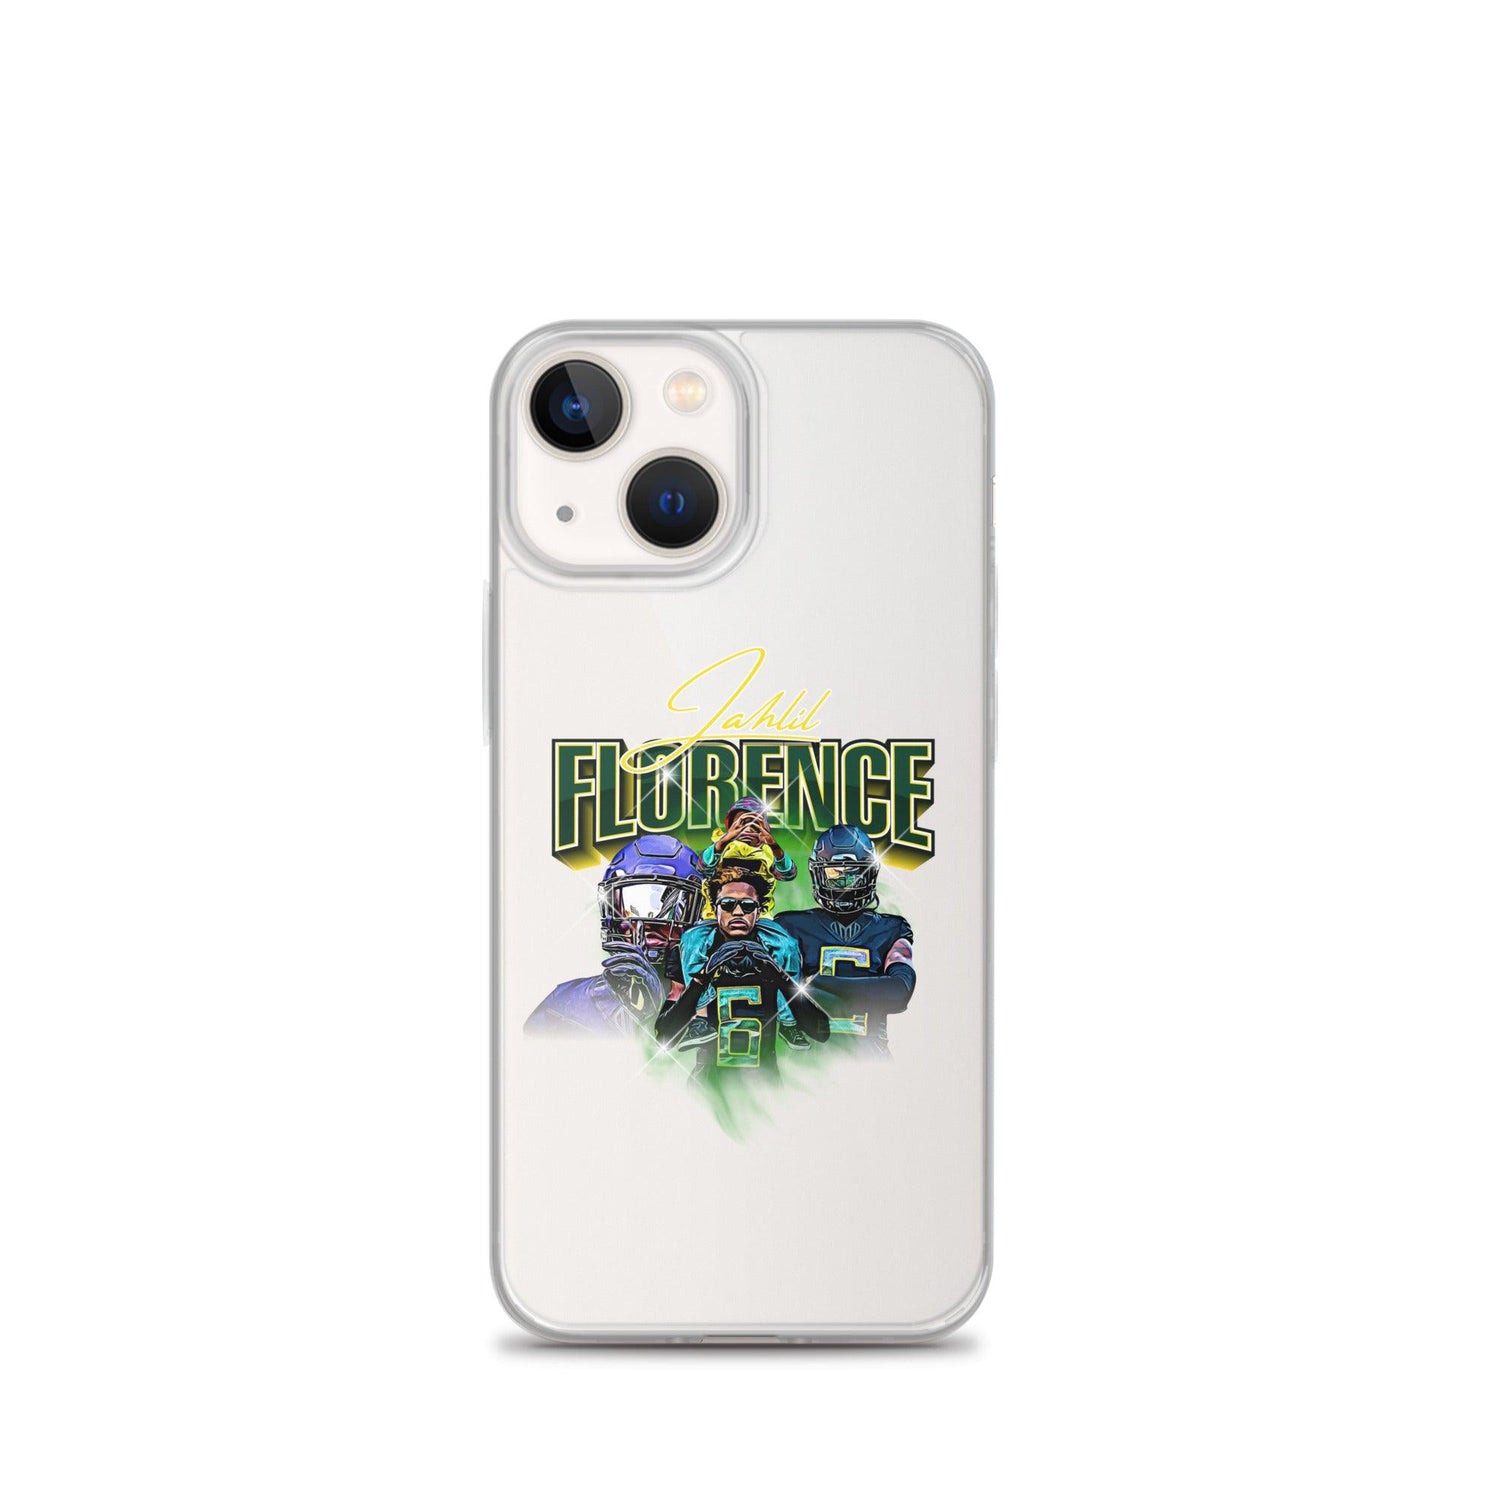 Jahlil Florence “Heritage” iPhone Case - Fan Arch